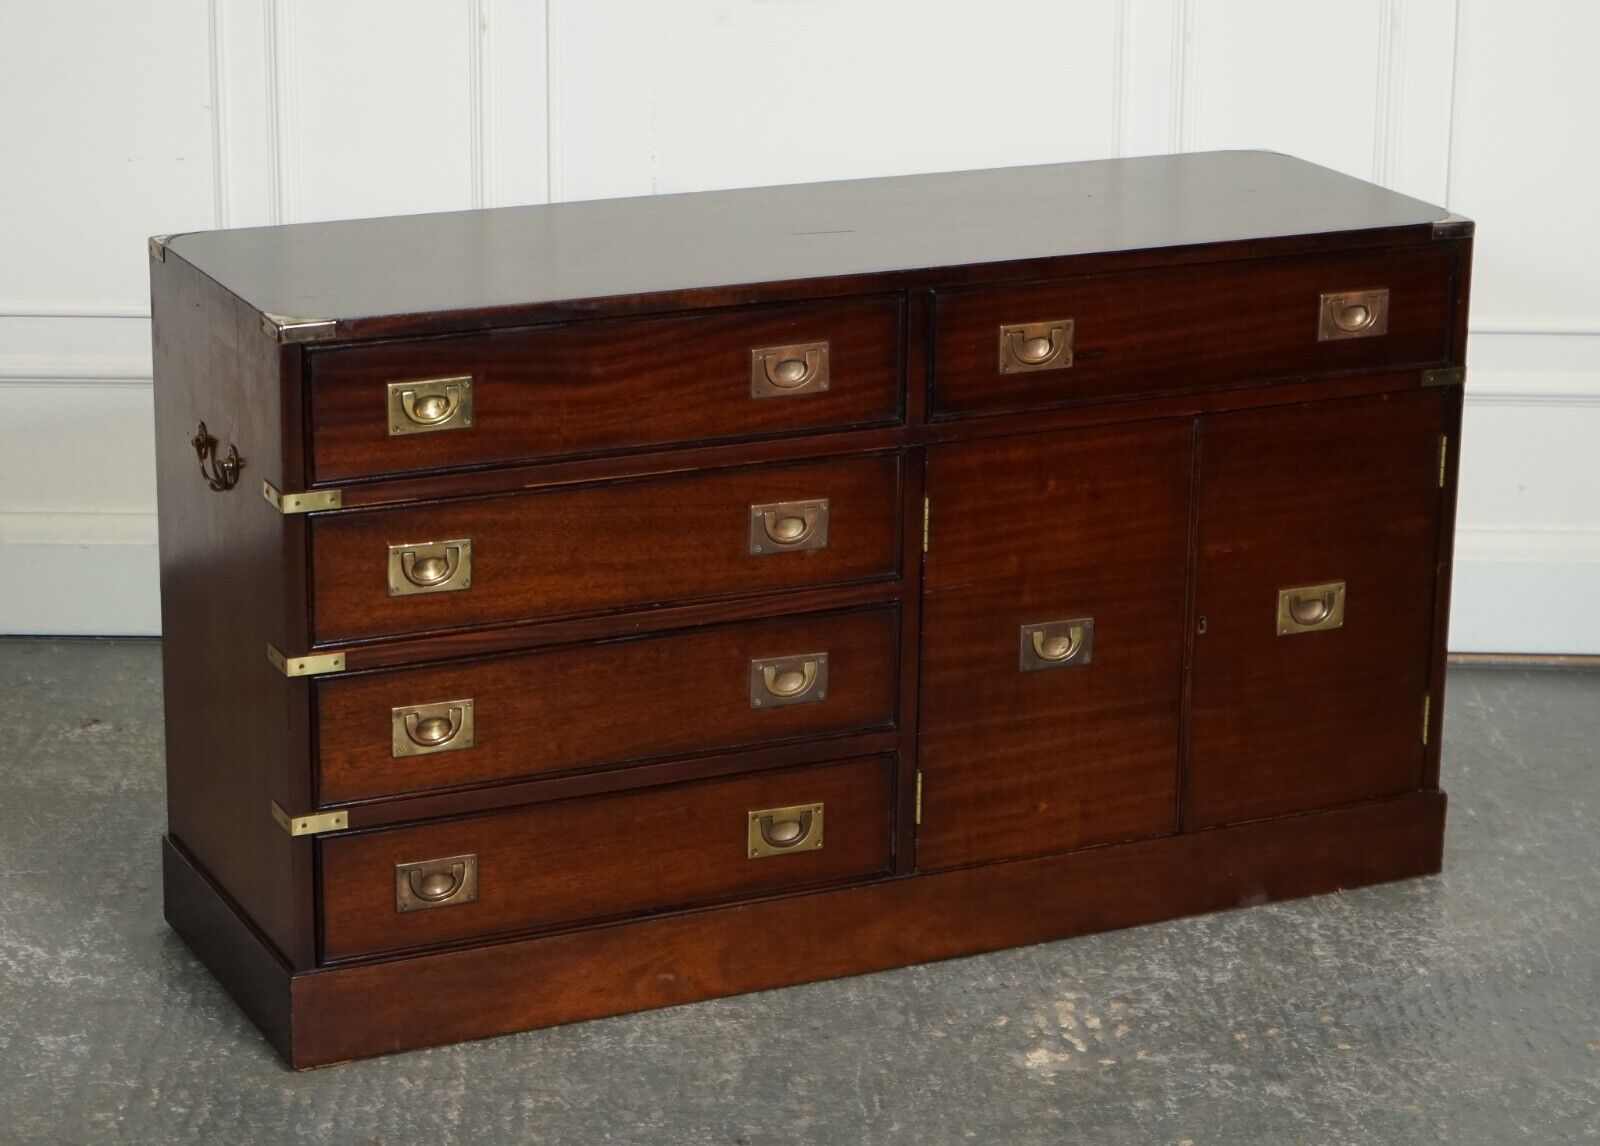 VINTAGE MILITARY CAMPAIGN SIDEBOARD LOTS OF STORAGE AND BRASS FITTINGS